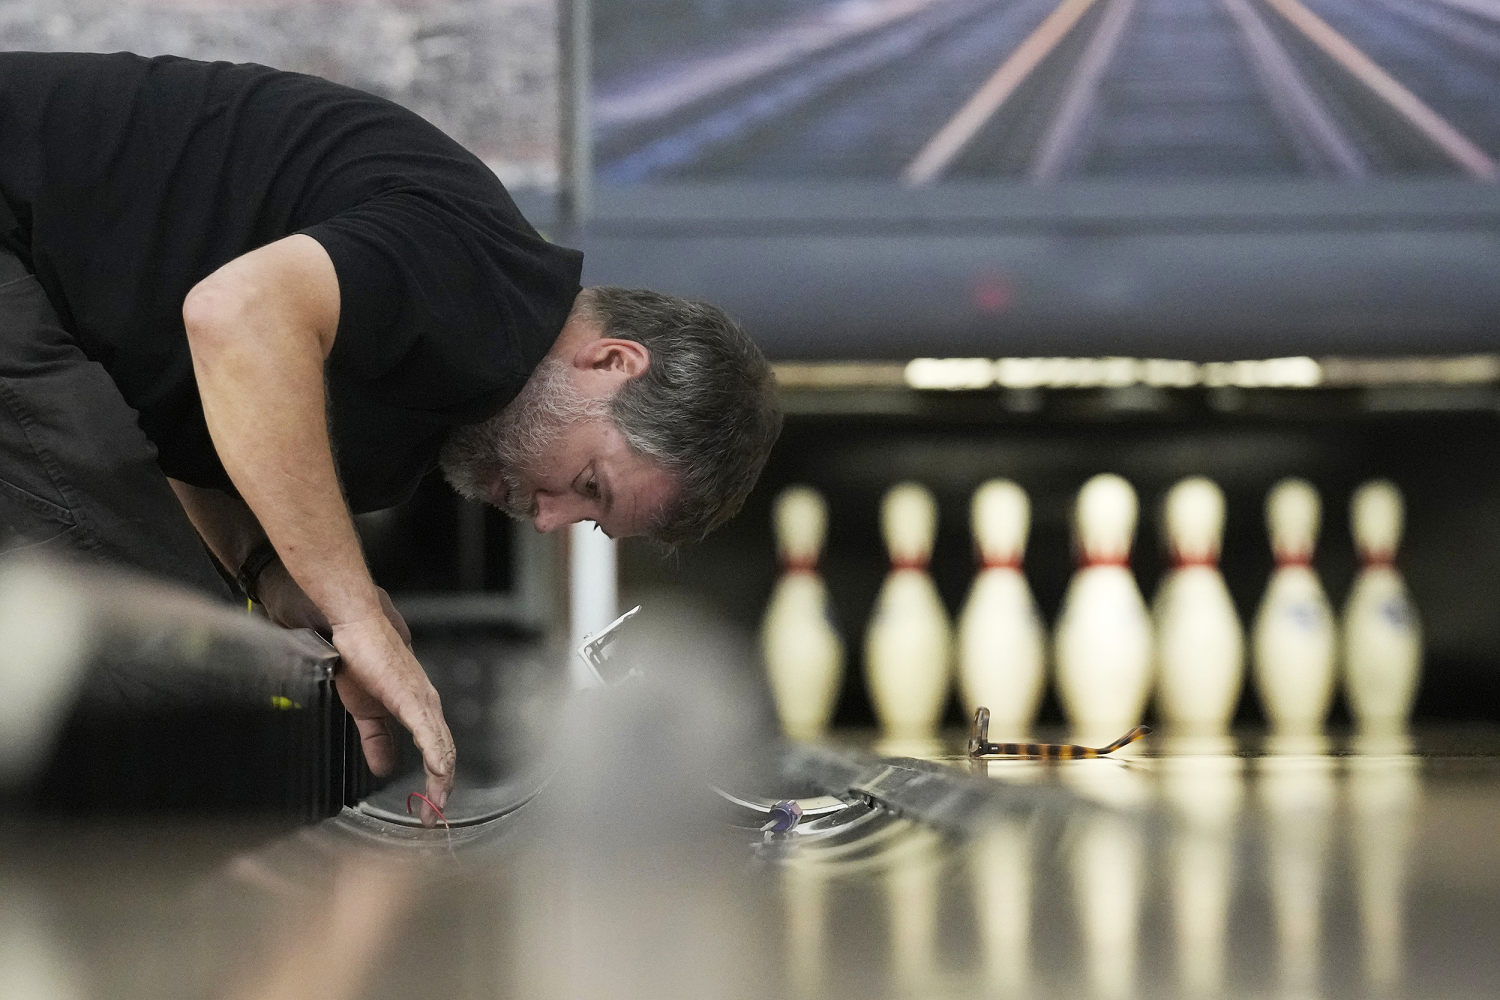 Lewiston bowling alley reopens 6 months after Maine’s deadliest mass shooting